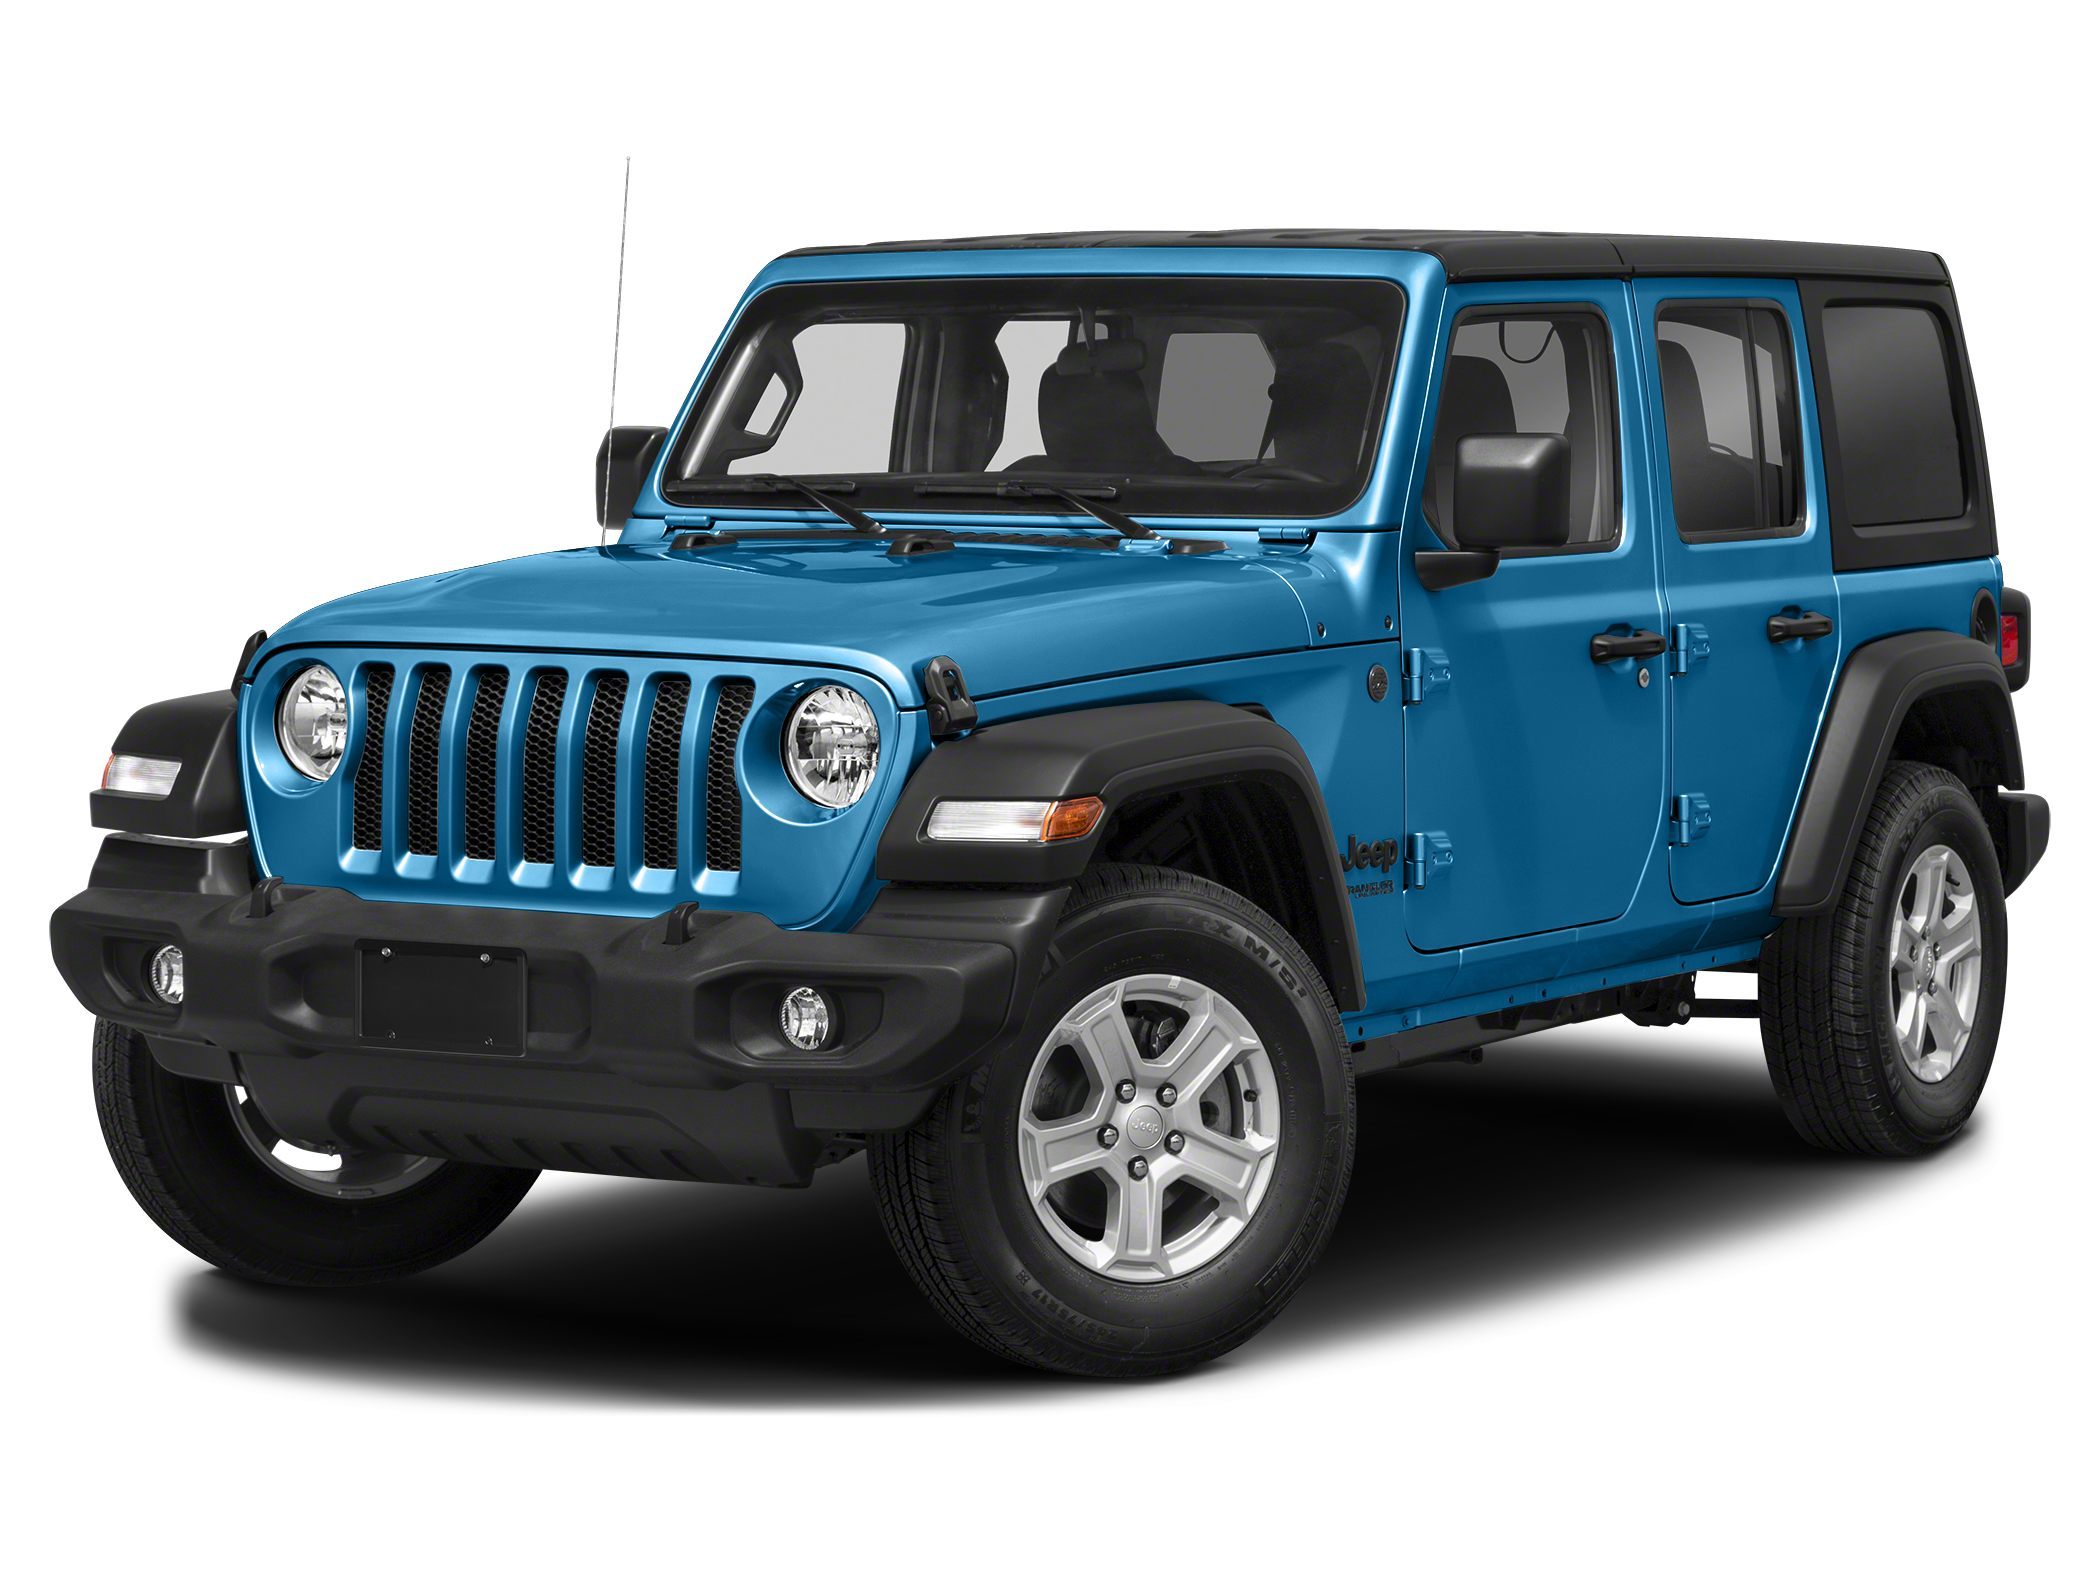 New 2023 Jeep Wrangler SUV 4-DOOR SPORT 4X4 Hydro Blue Pearlcoat For Sale |  Medford OR Lithia Motors | Stock: PW671350